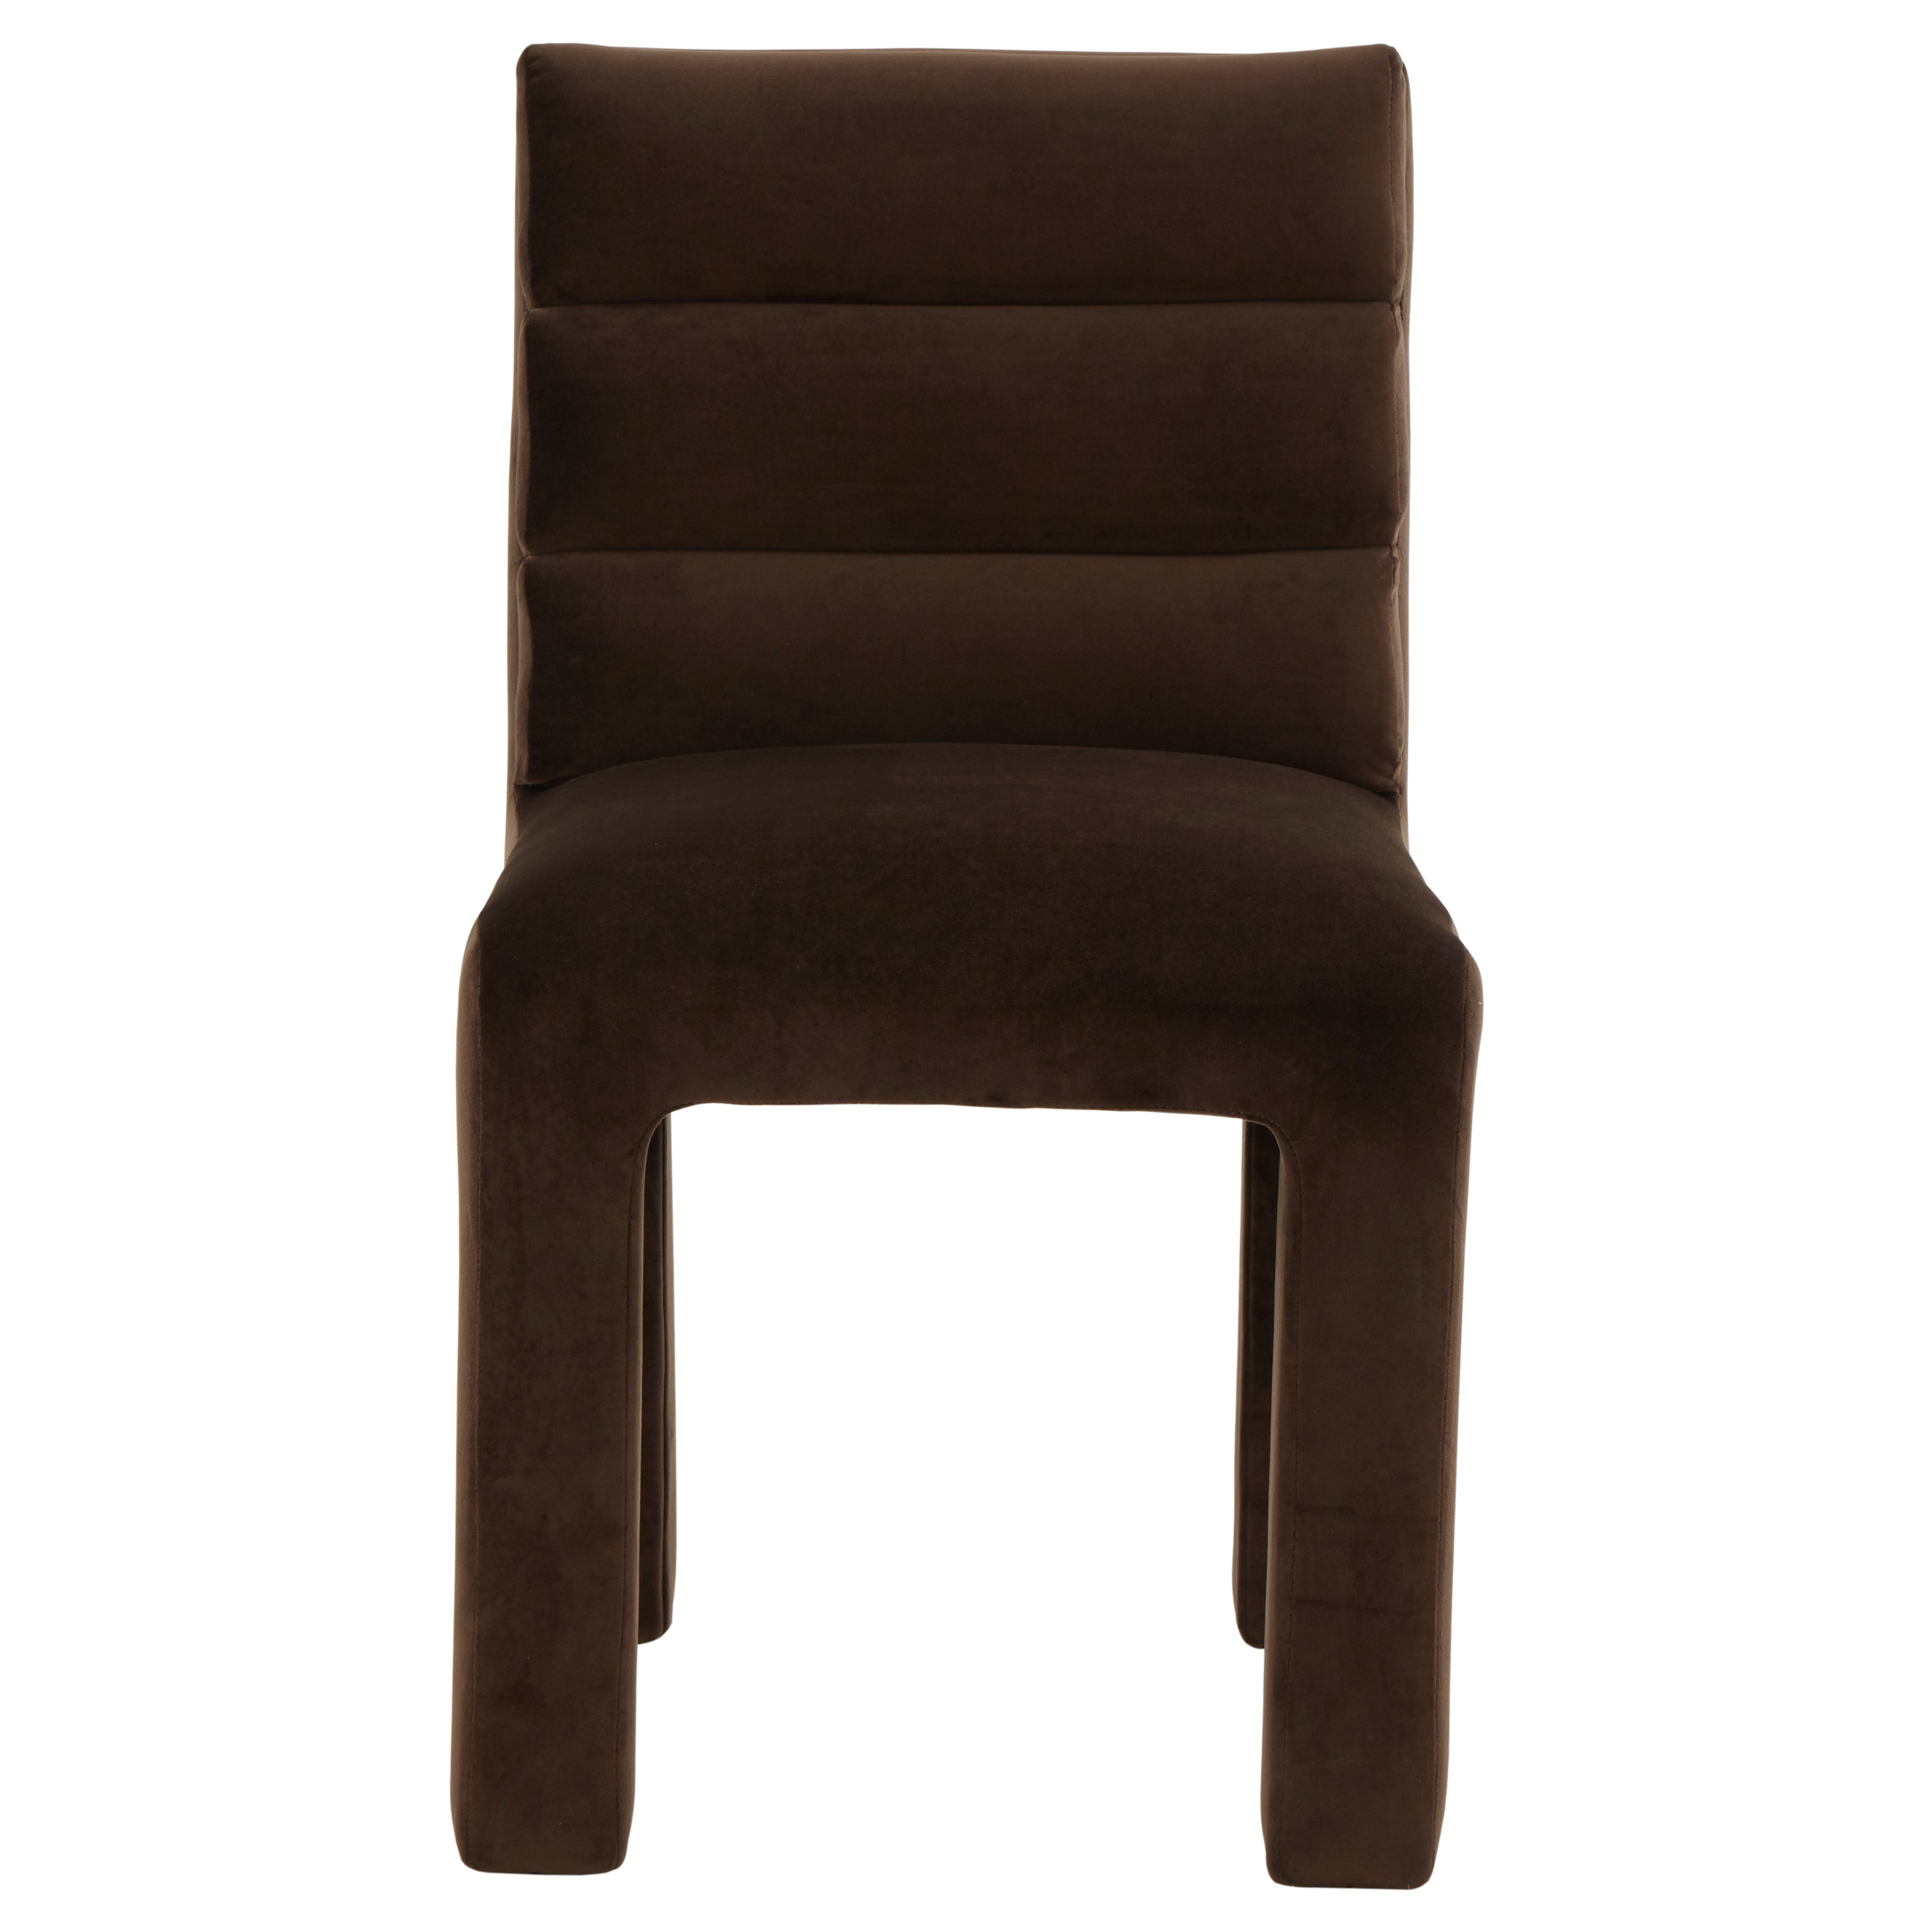 Safavieh Couture Pietro Channel Tufted Dining Chair, SFV5081